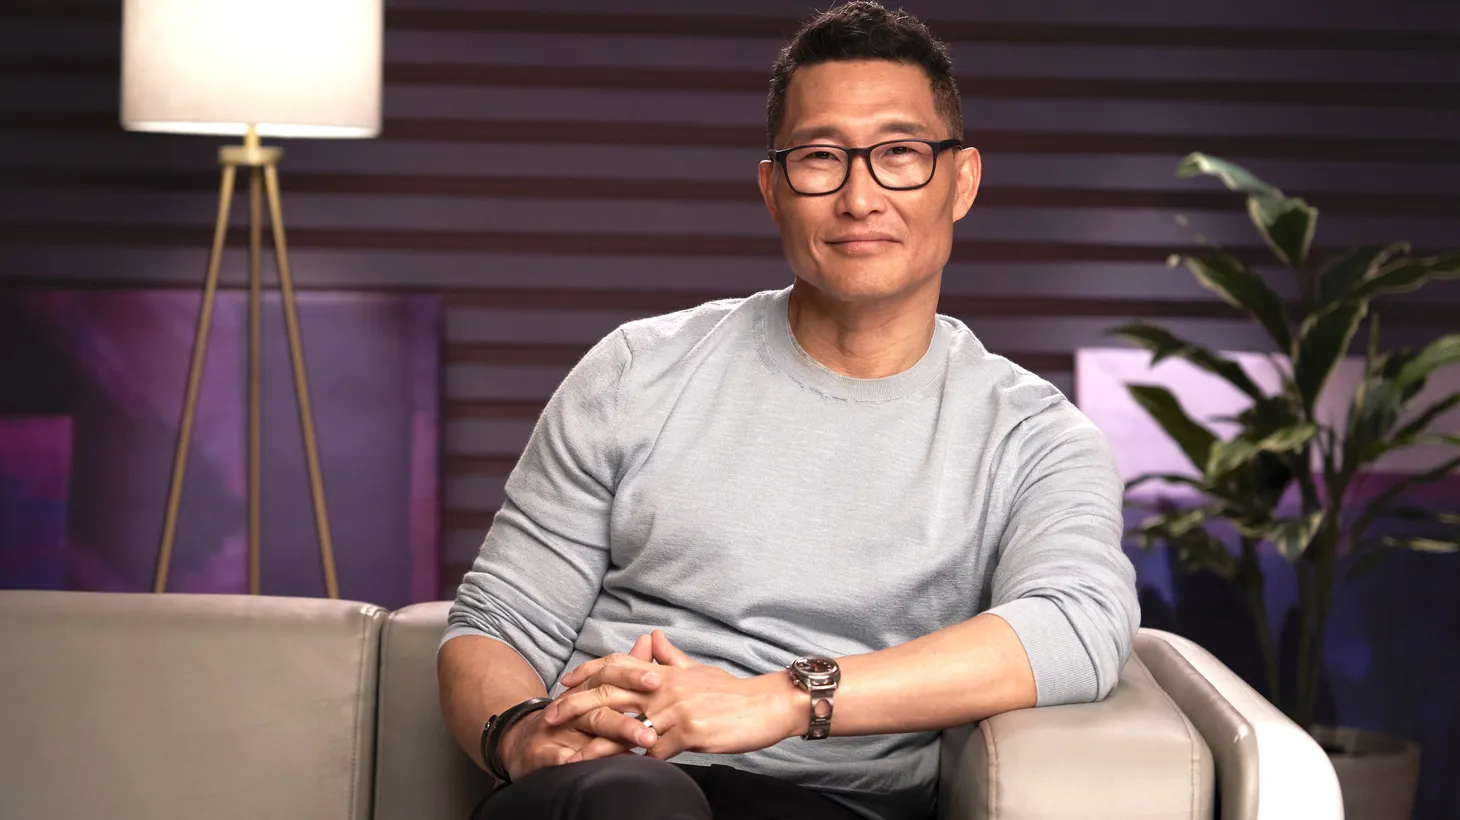 “I also remember when I was starting out as an actor, I kept hearing ‘Oh well, Asian people can't be funny.’ Now you look today at people like Ali Wong and Ronny Chieng and Ken Jeong and you know, Jimmy O. Yang, the list goes on,” says actor Daniel Dae Kim.